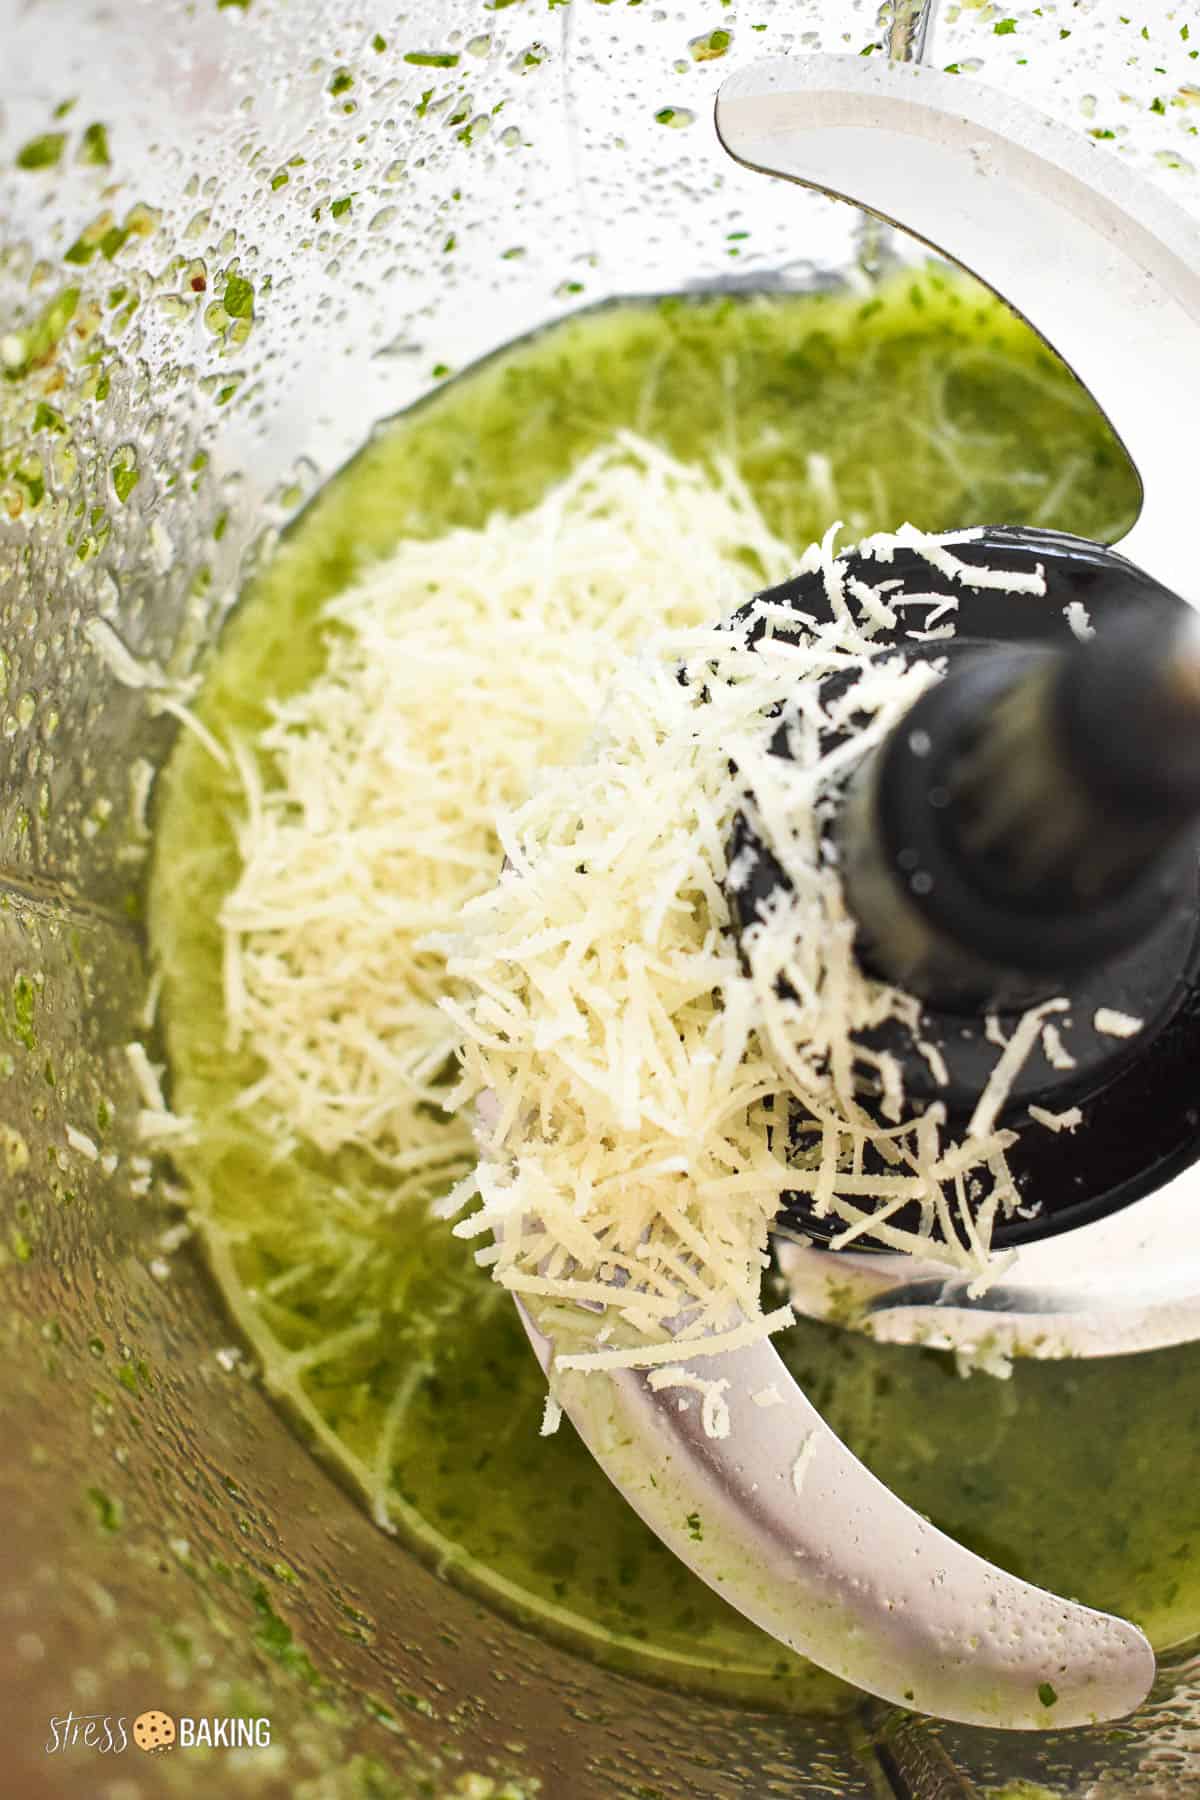 Shredded parmesan cheese being added to pesto in a food processor